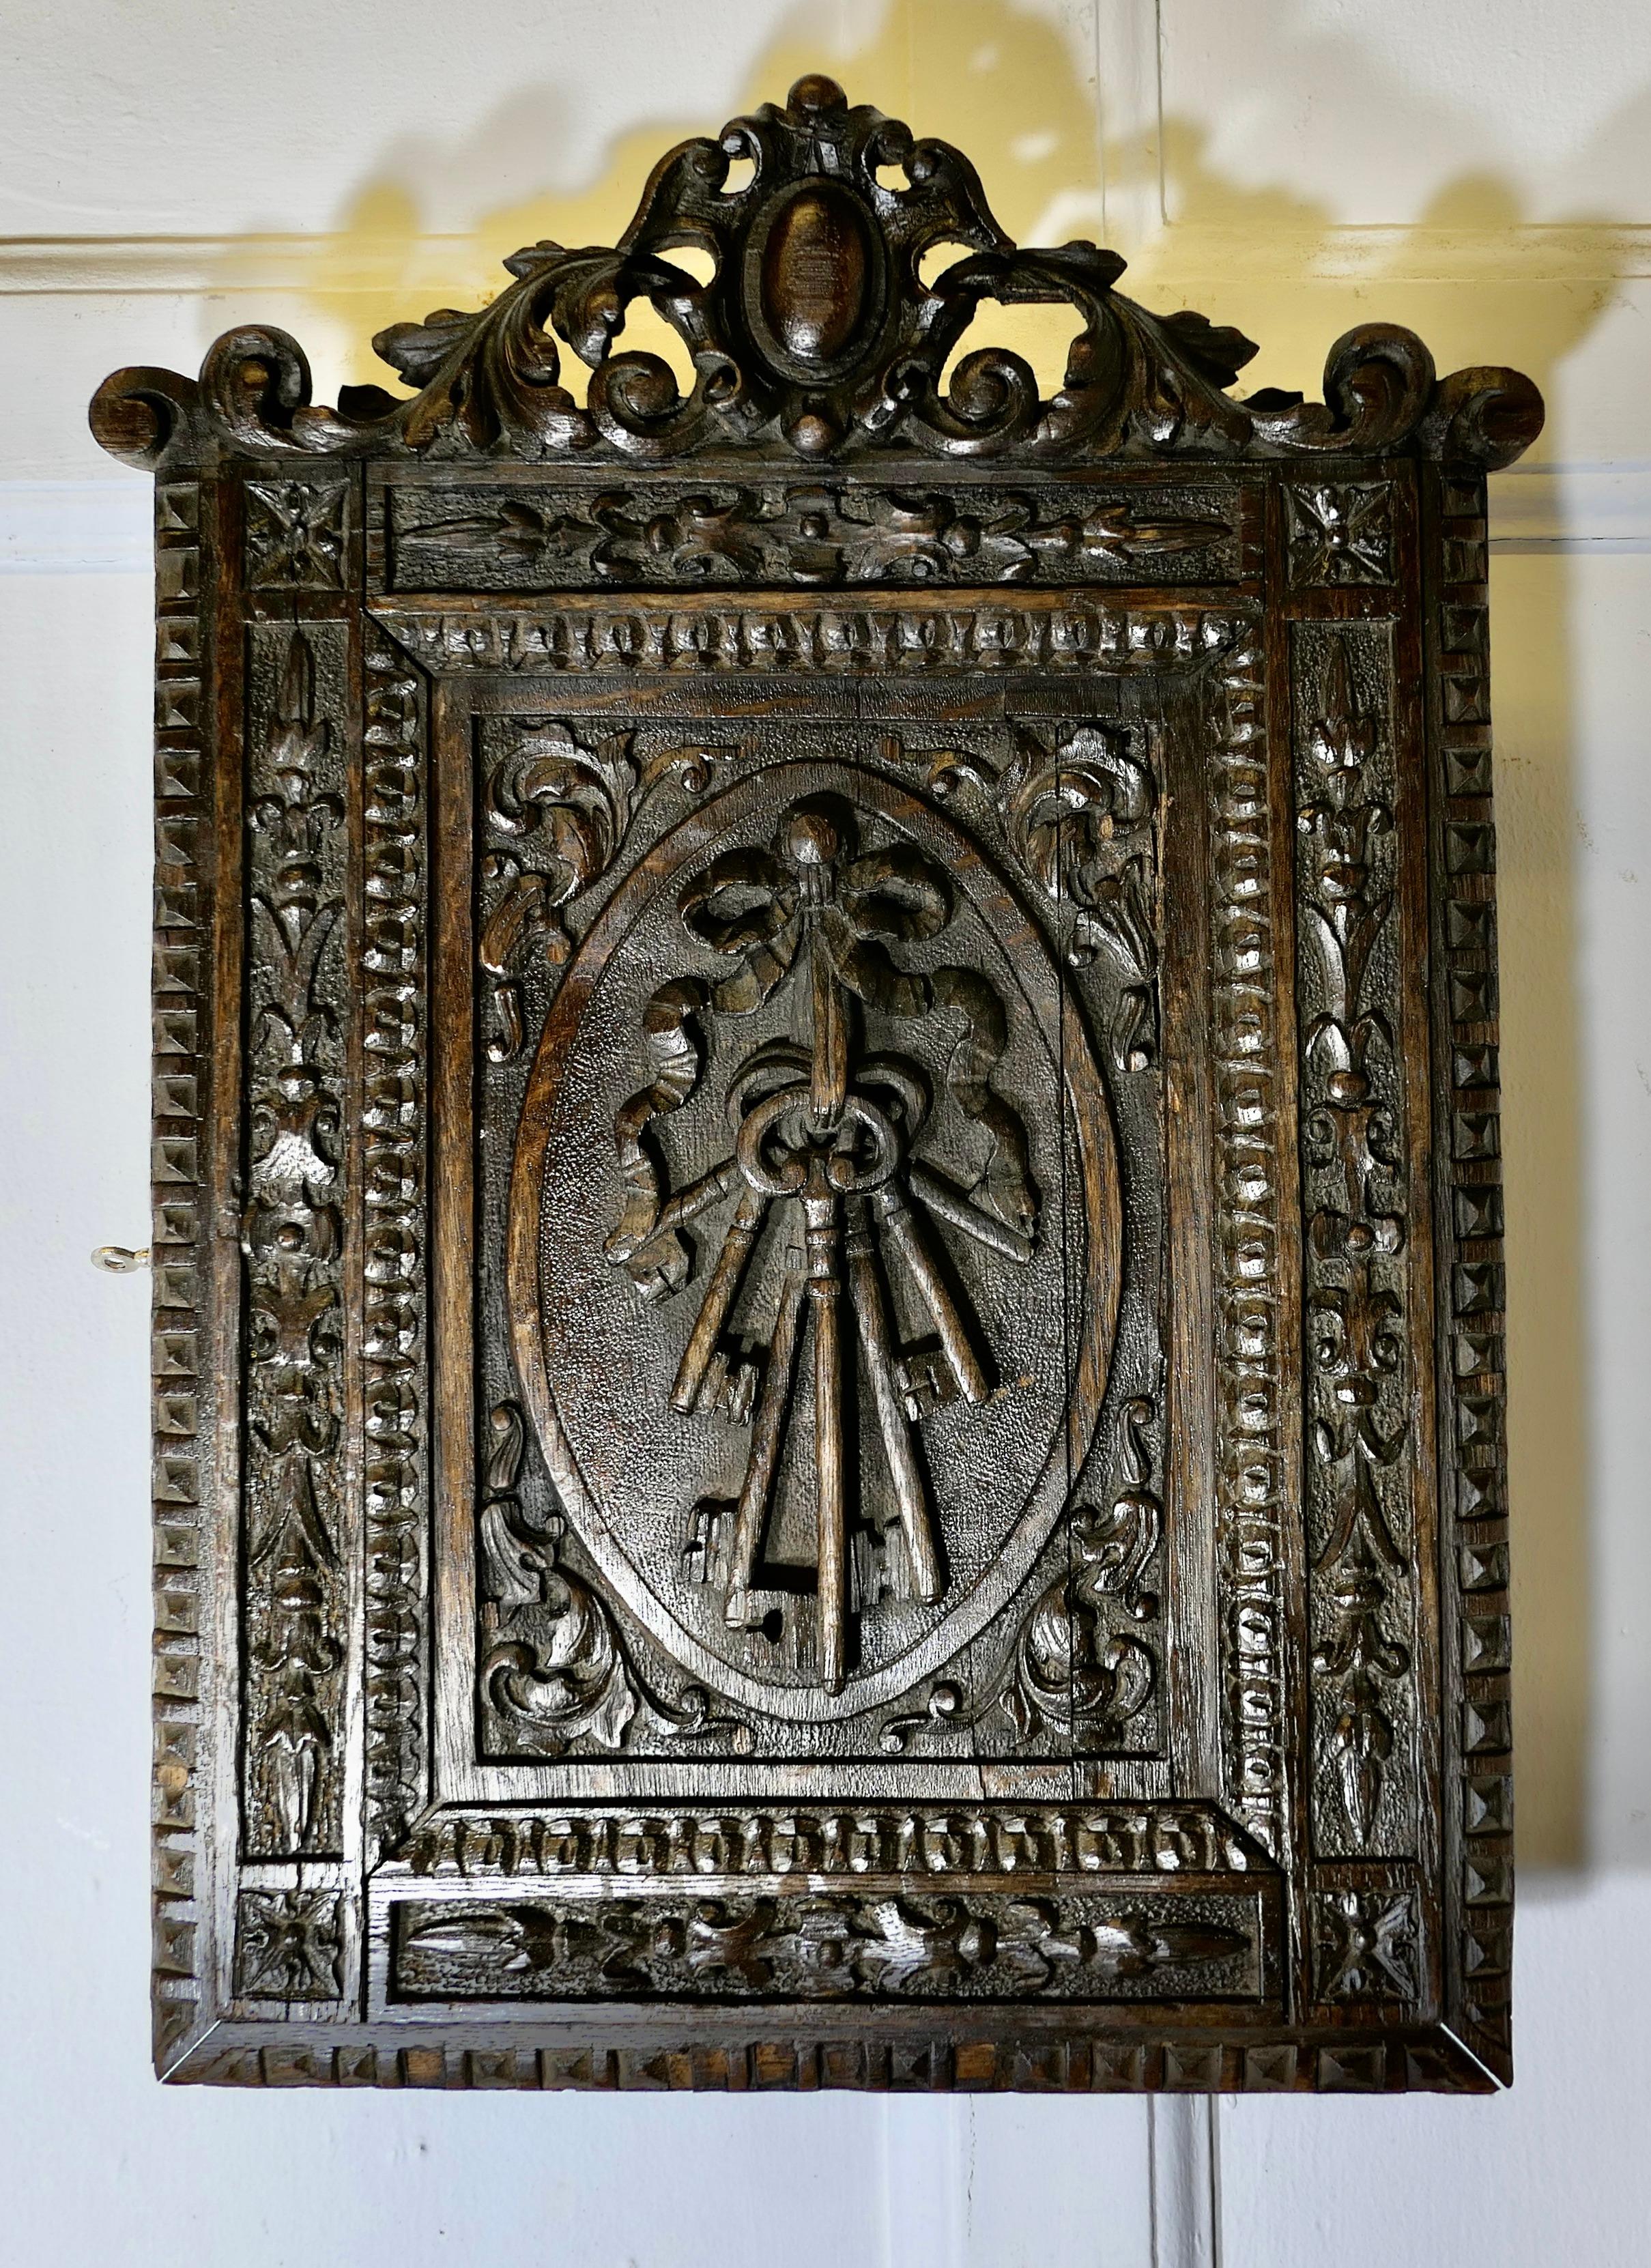 Carved Oak Key Cupboard

A very attractive piece, the cupboard can be wall hung showing the gothic carving on the front of the door to full advantage, it shows a large bunch of keys in a panel surrounded with gothic border. Inside the cupboard is